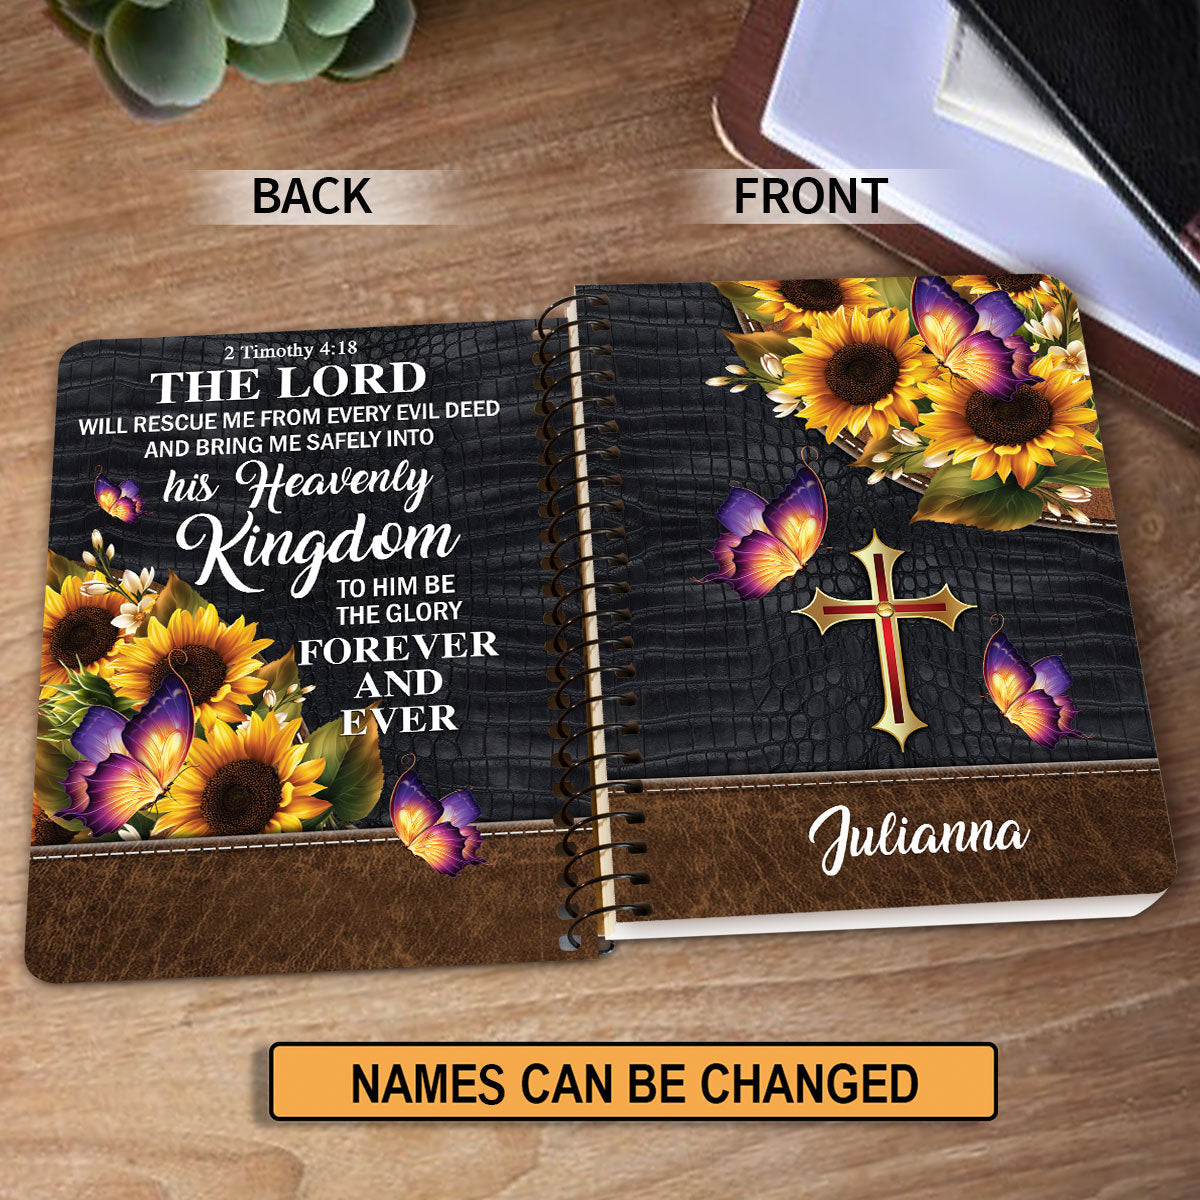 The Lord Will Rescue Me From Every Evil Deed Personalized Sunflower Spiral Journal, Inspiration Gifts For Christian People